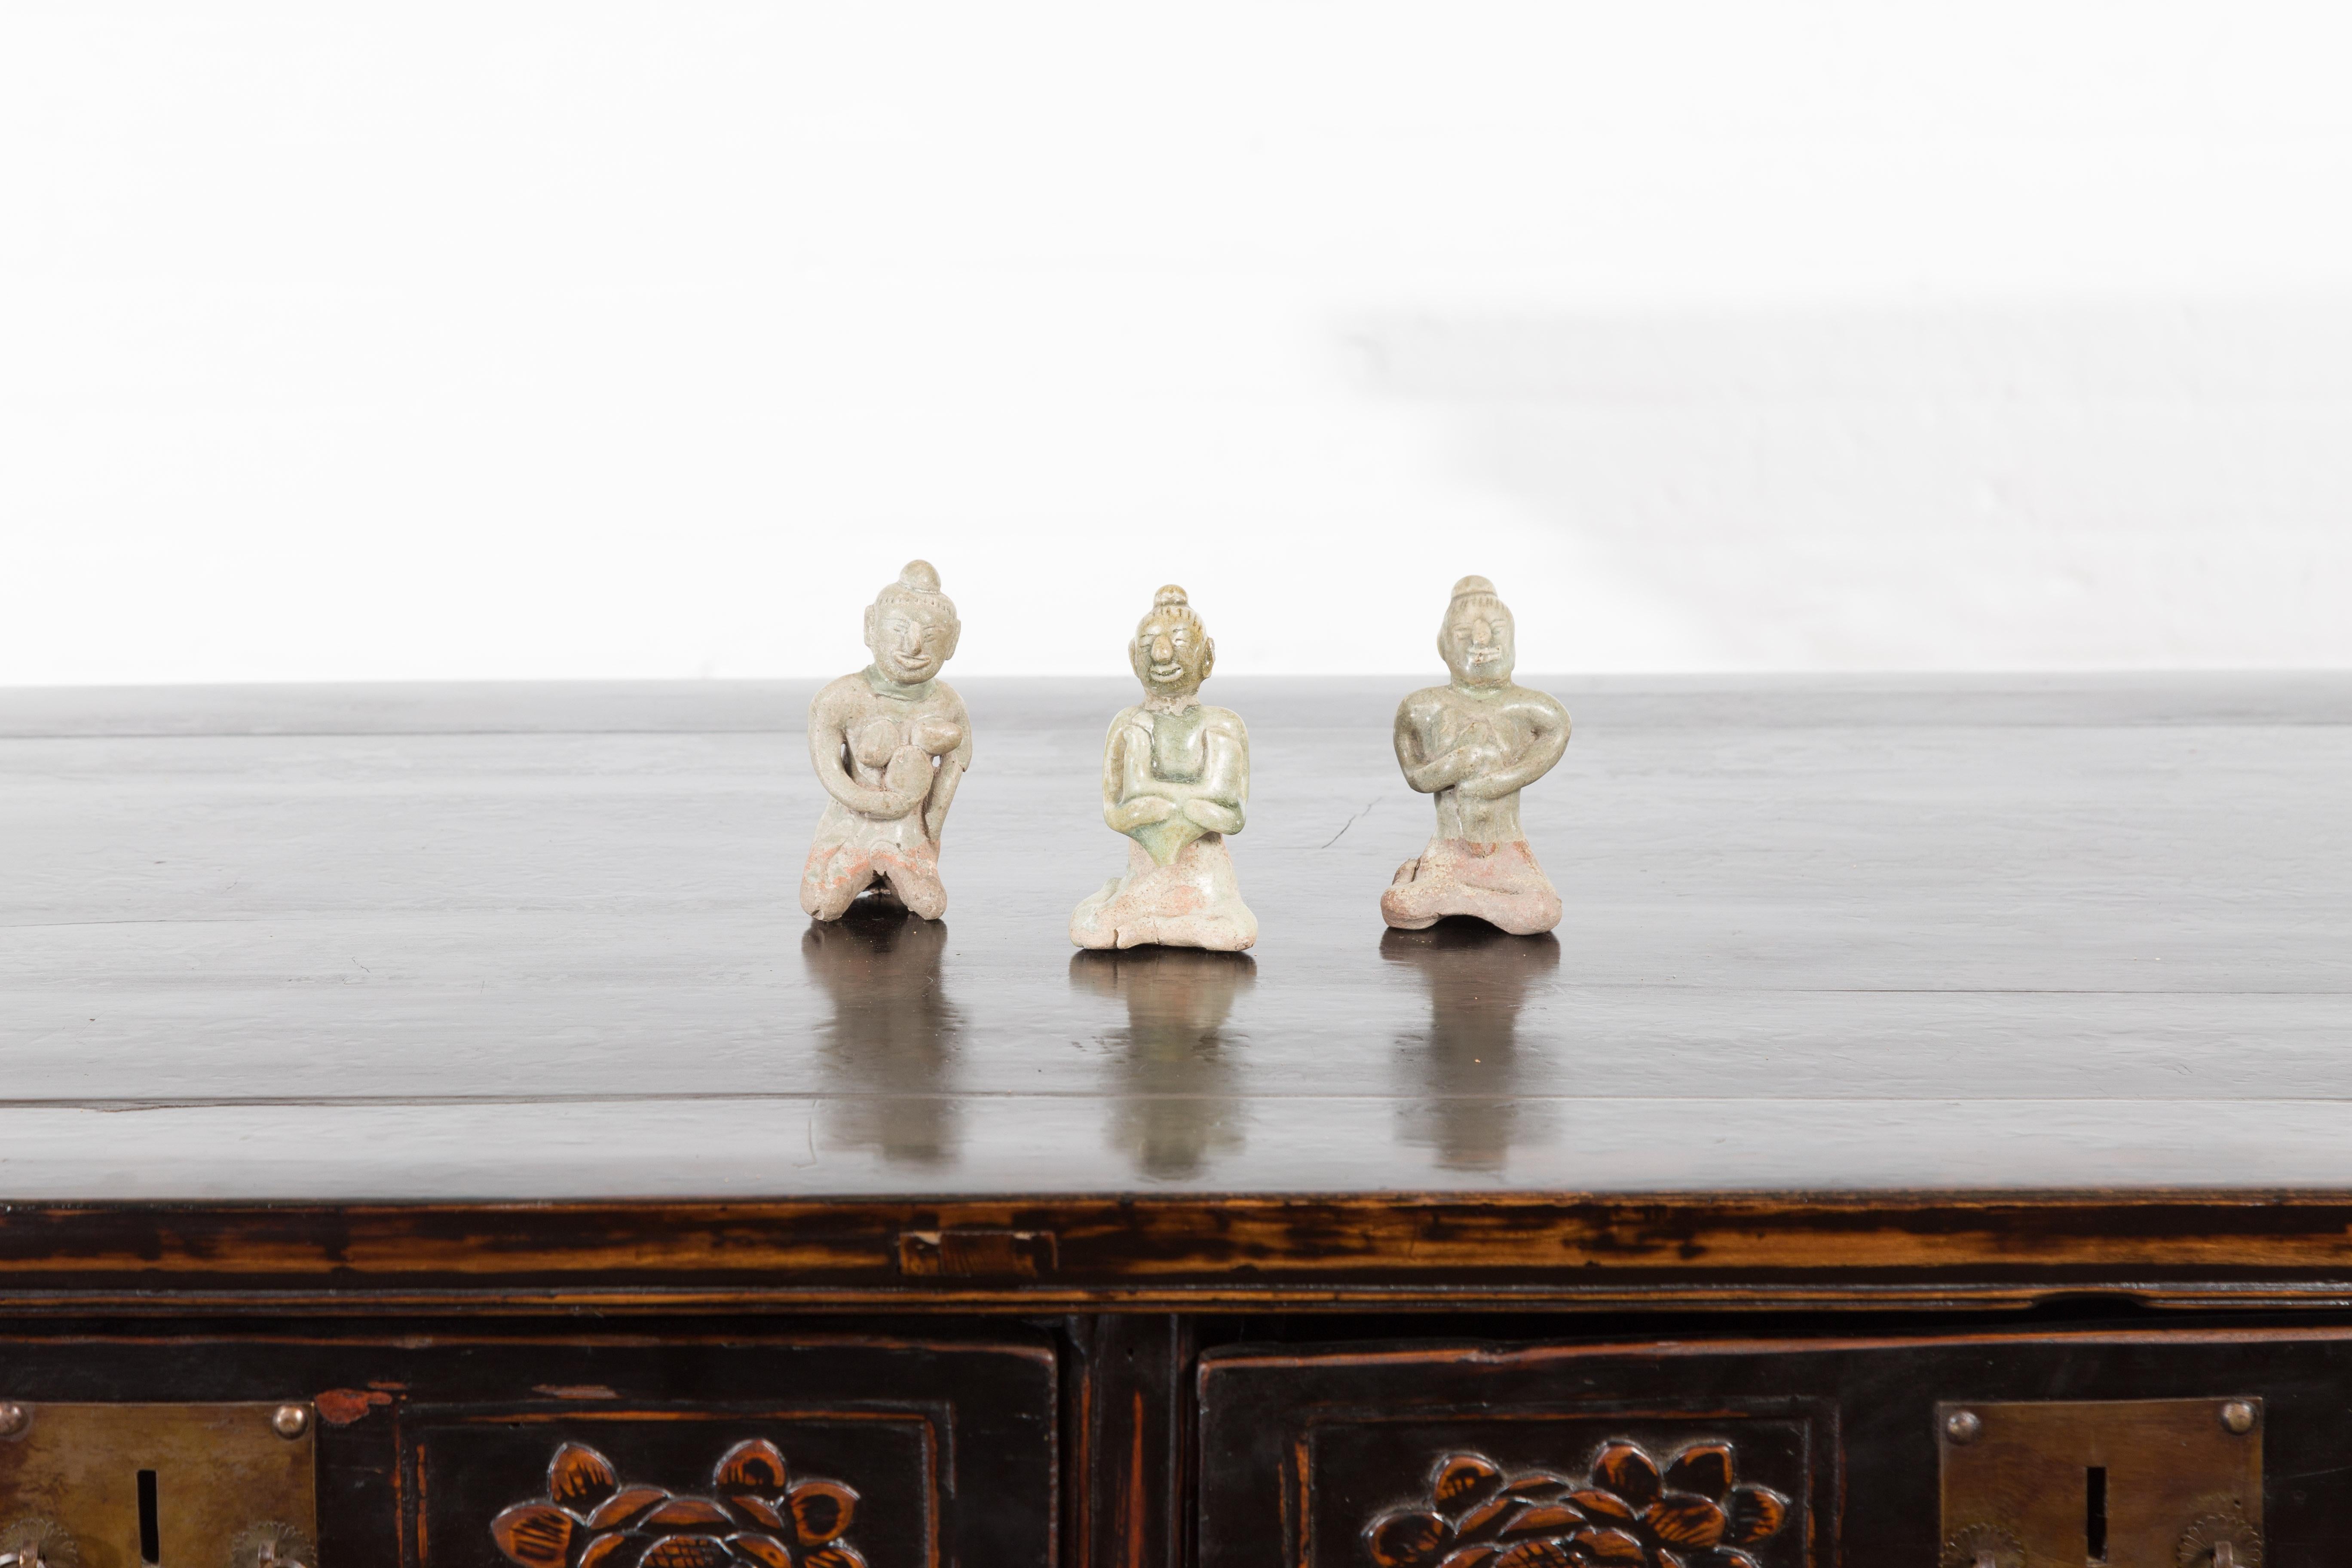 Set of Three 14th or 15th Century Ceramic Fertility Figures from Thailand In Good Condition For Sale In Yonkers, NY